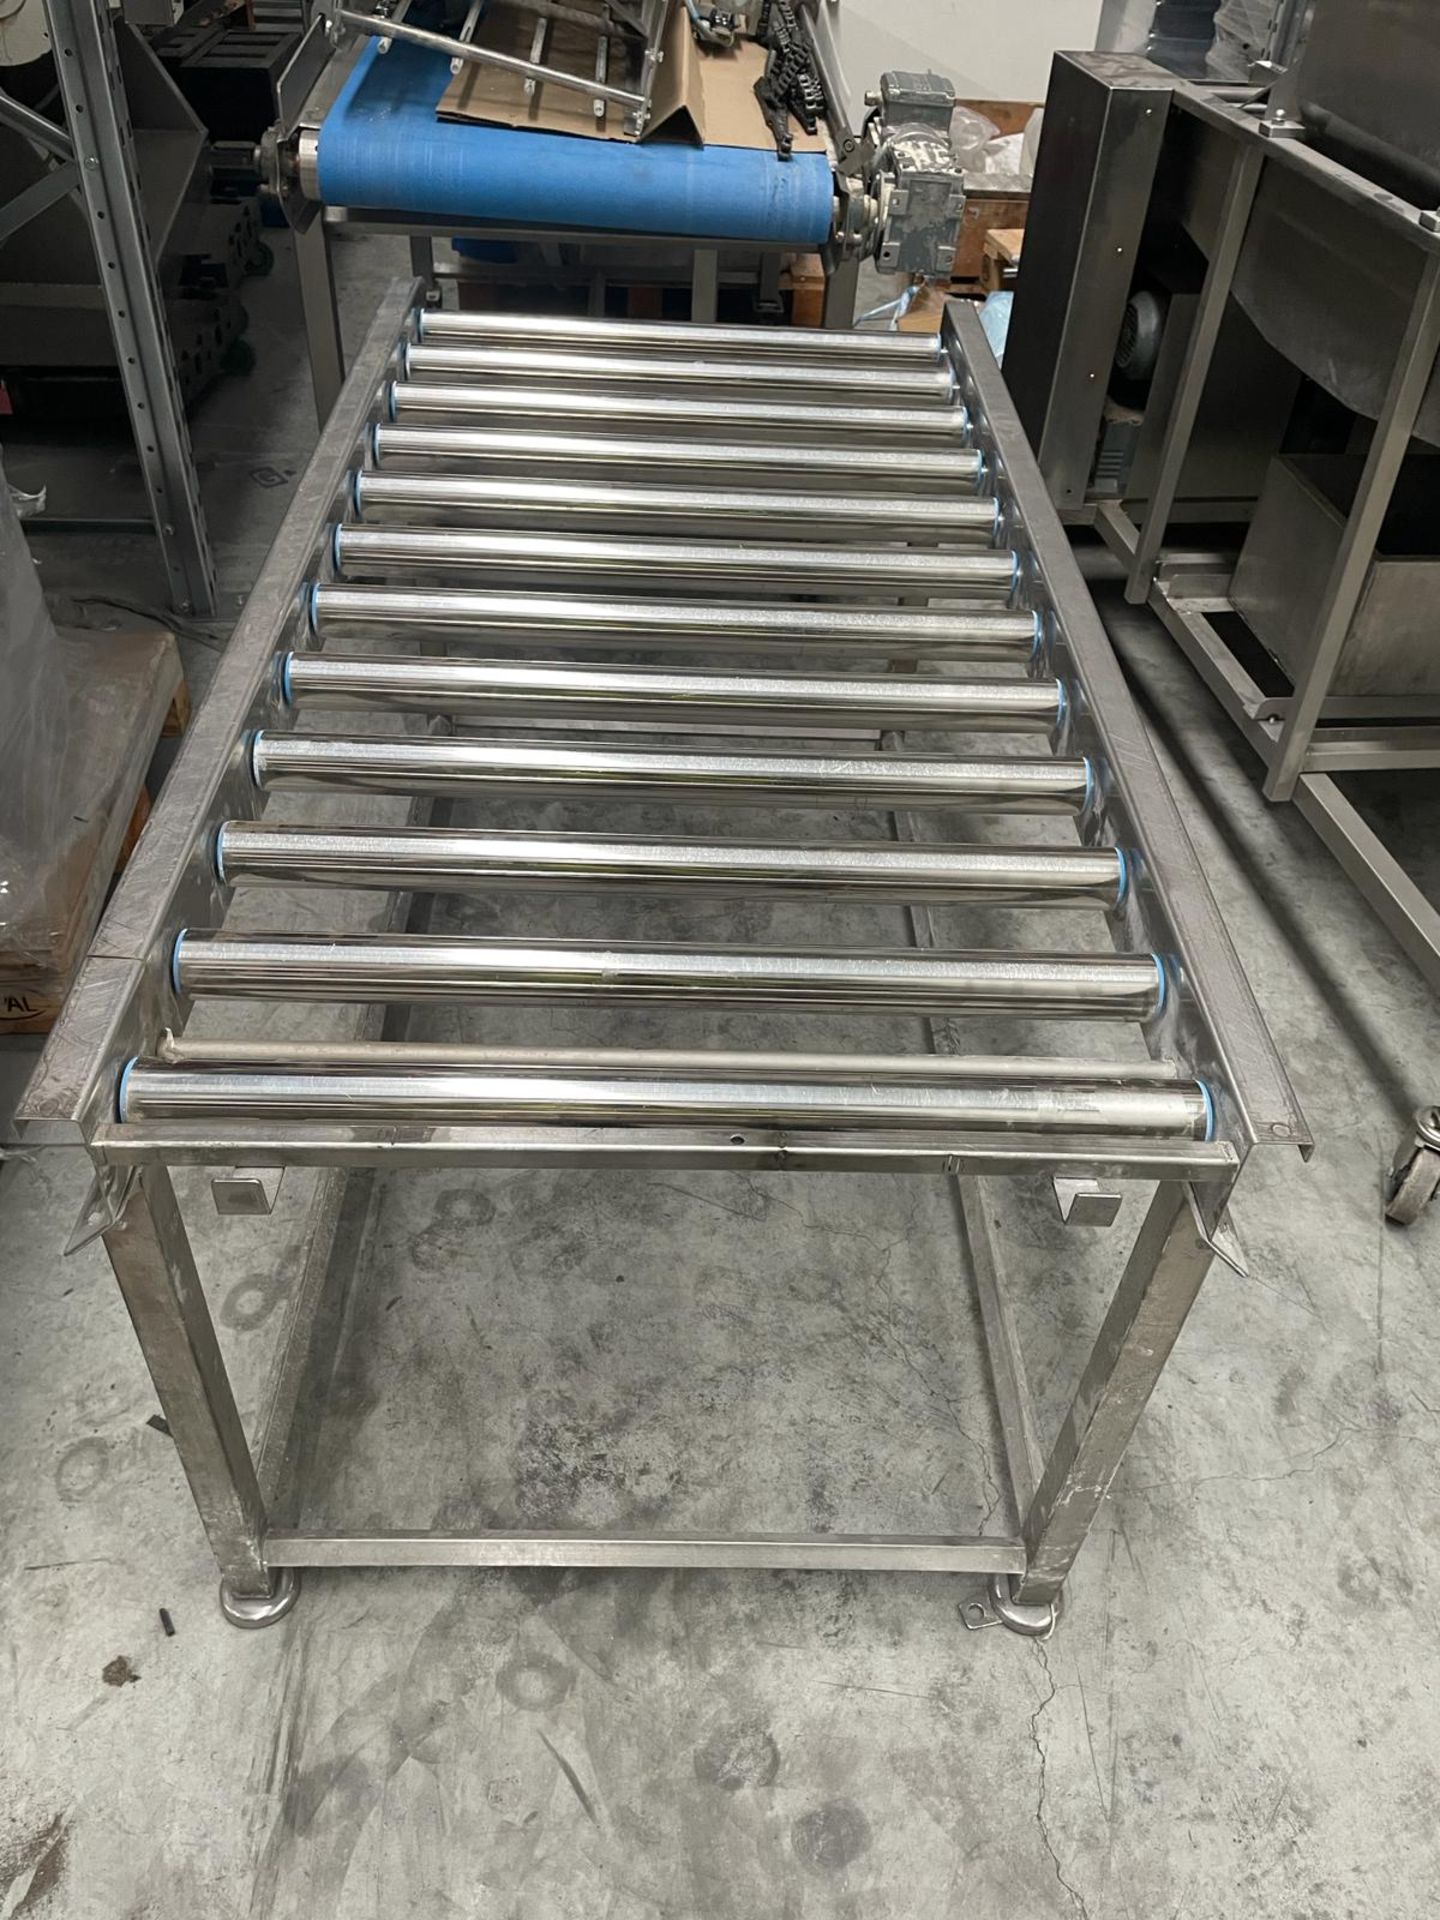 Gravity roller box conveyor, floor standing. 2000 x 1000 x 750 mm. Please note this lot is located